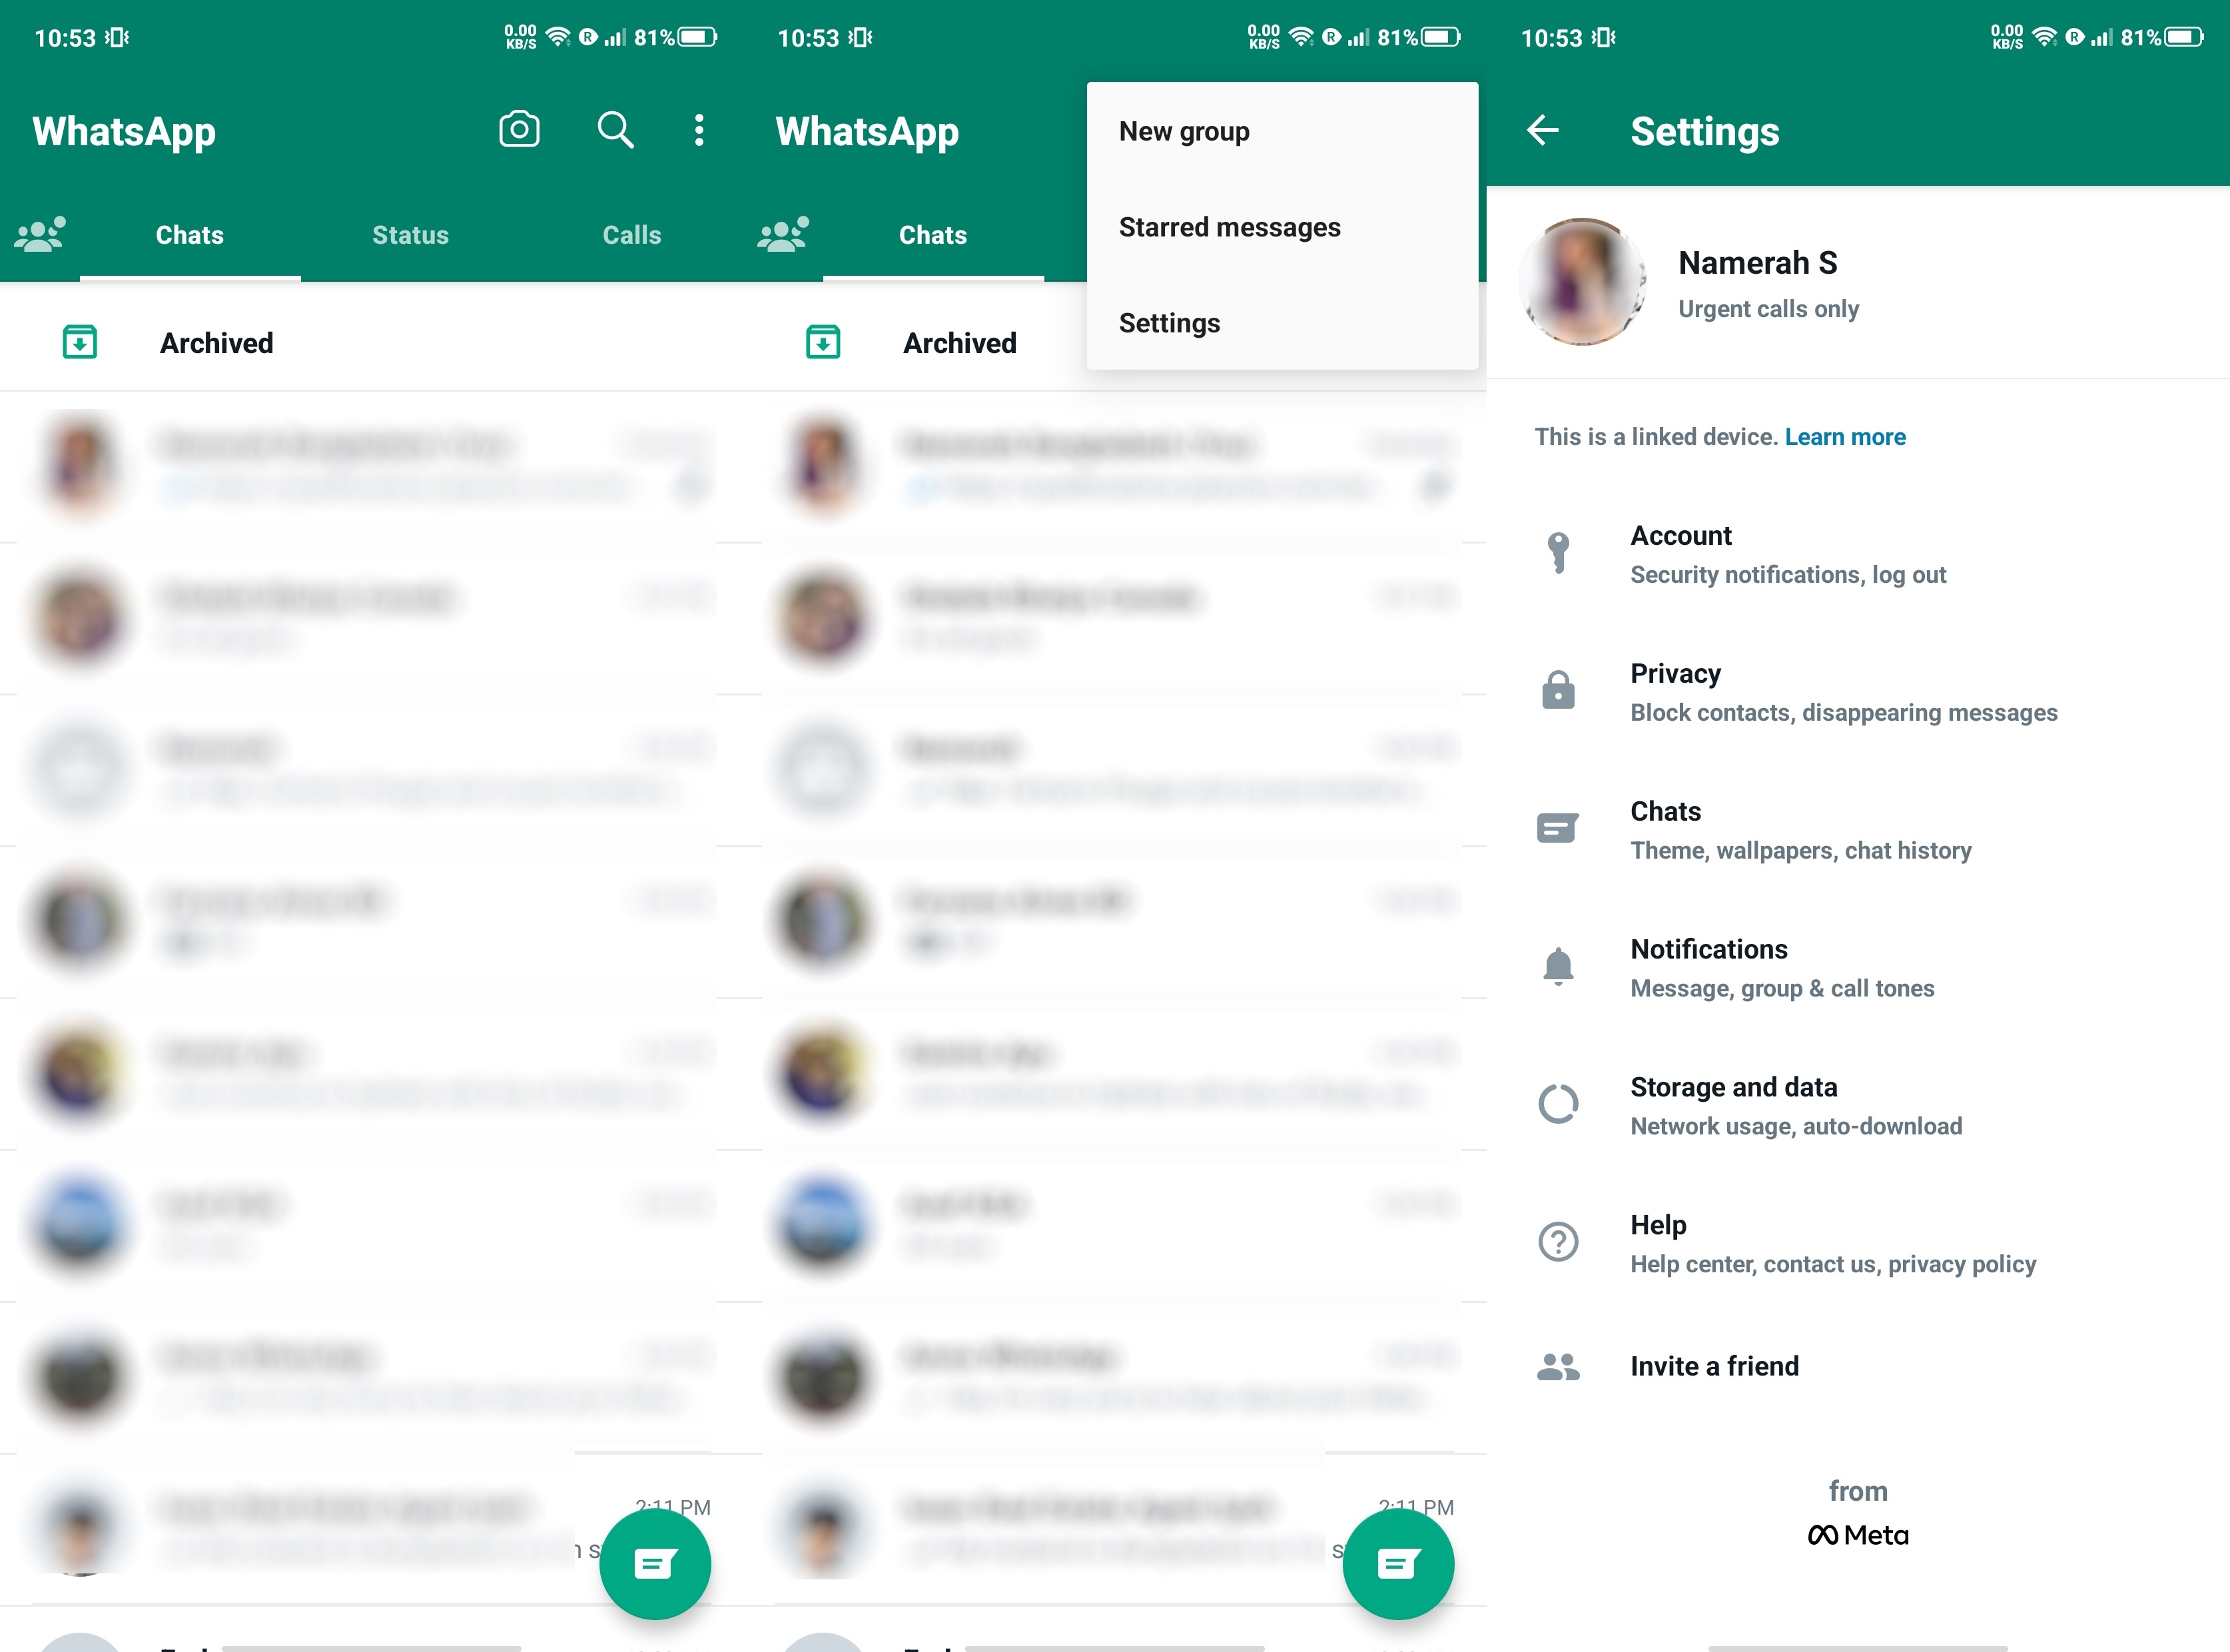 How to log out of a linked WhatsApp account on a phone